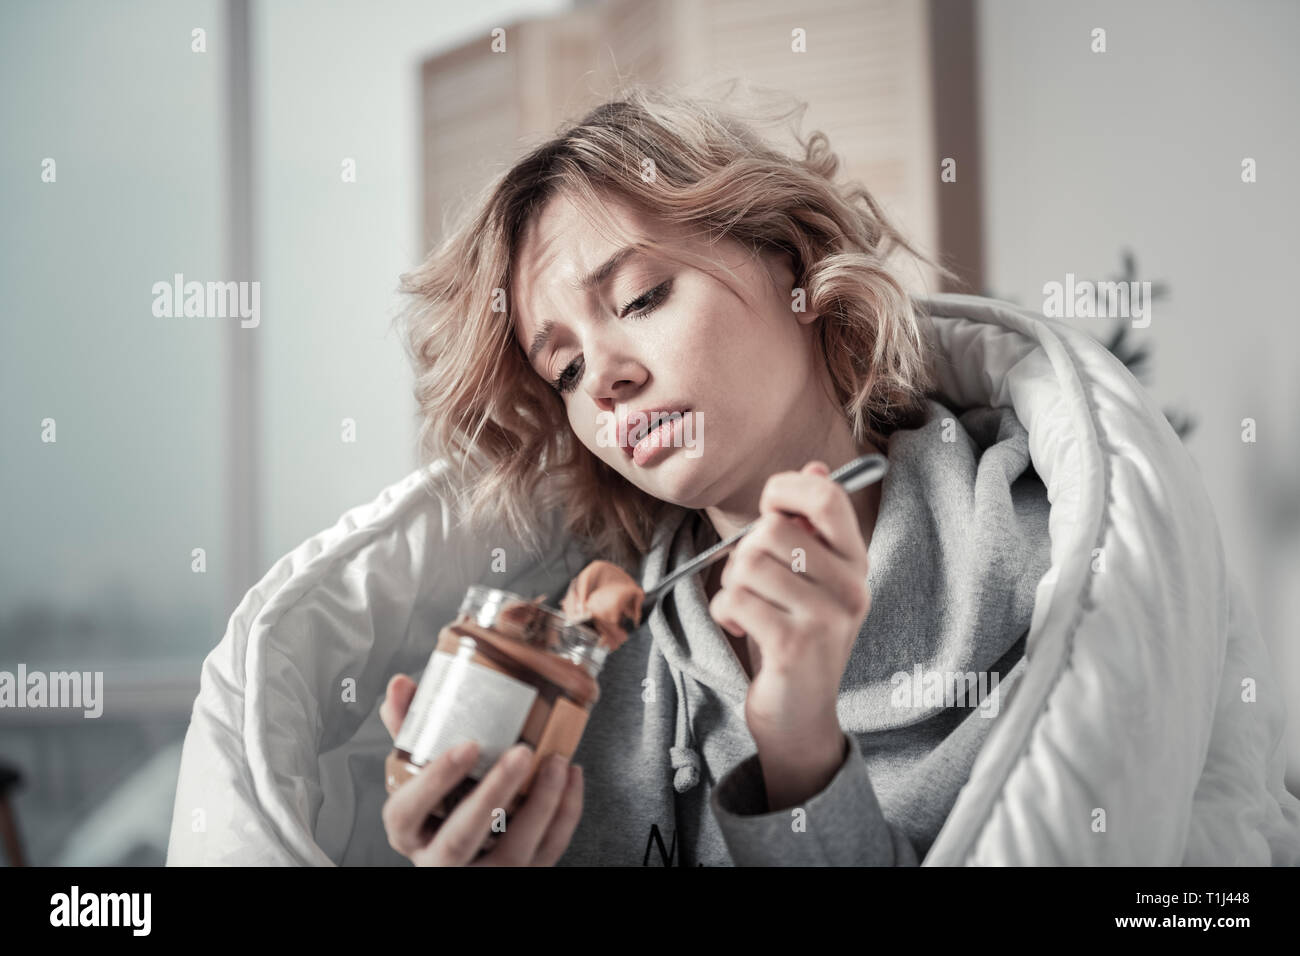 Young unhappy woman eating chocolate paste feeling stressed Stock Photo